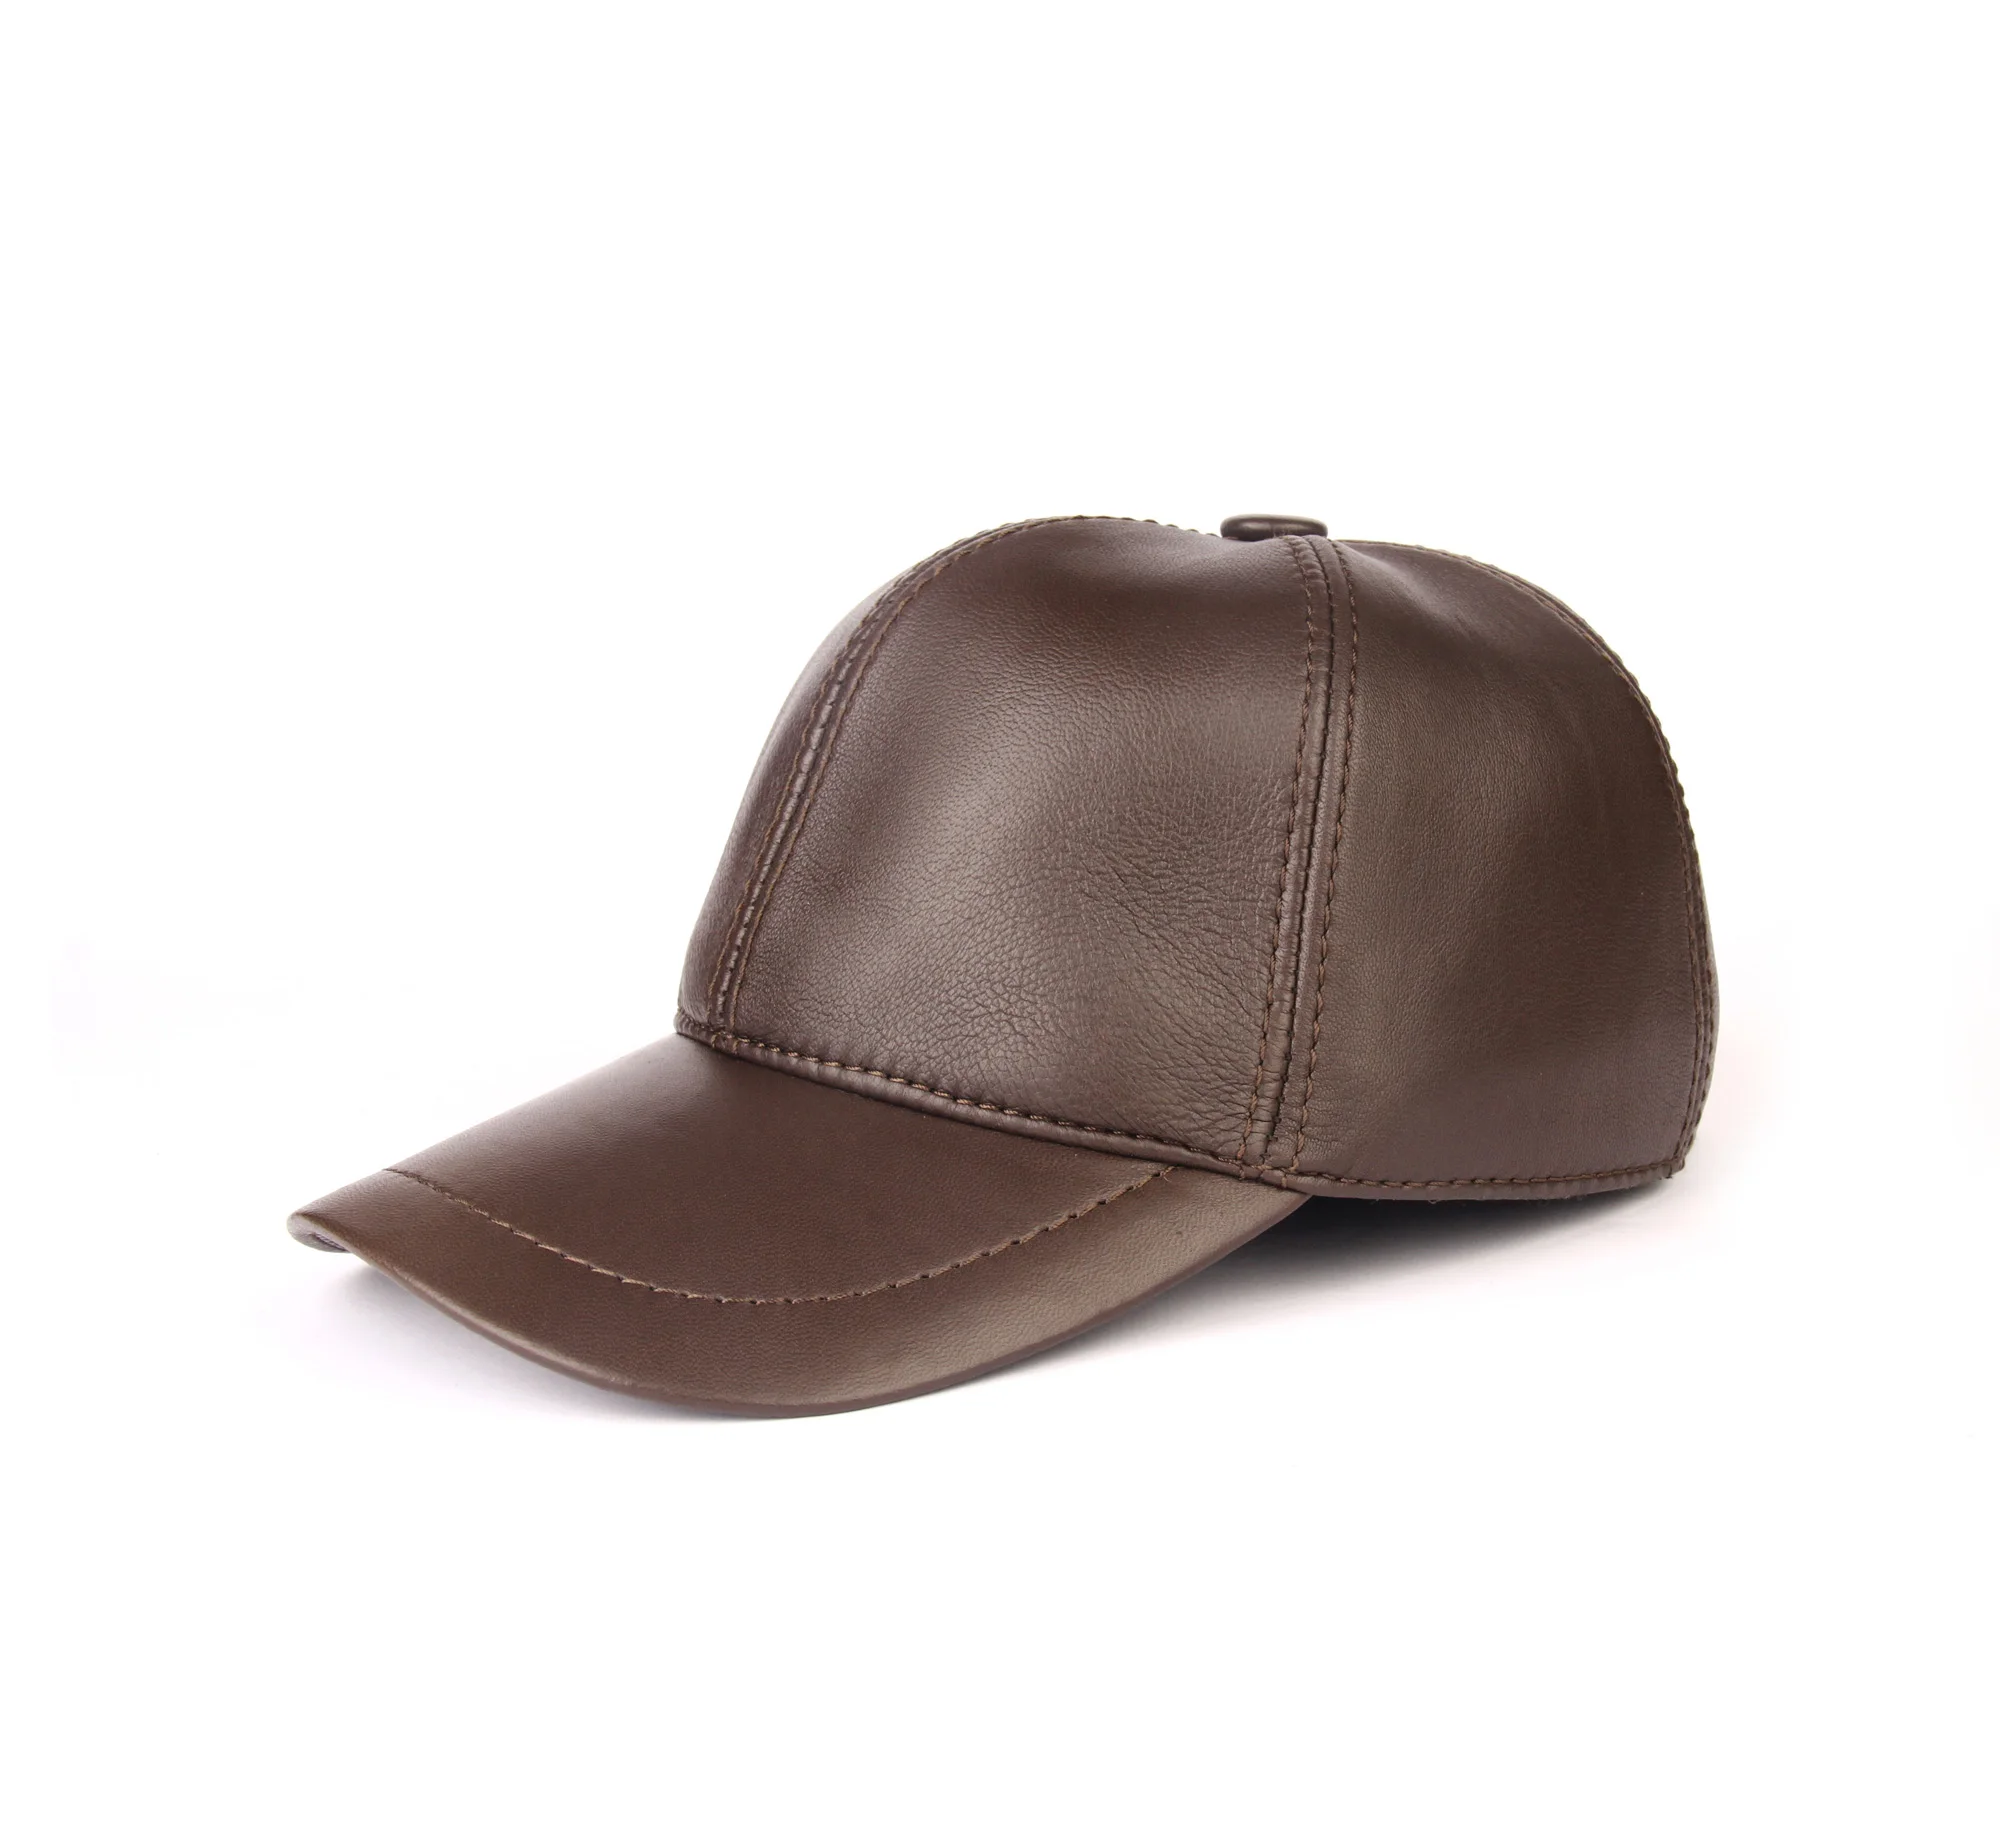 Handmade Brown Baseball Caps for Cold Winter Autumn with Real Sheep Skin Leather, Woolen Inside, Ear Covers, Men's Accessories